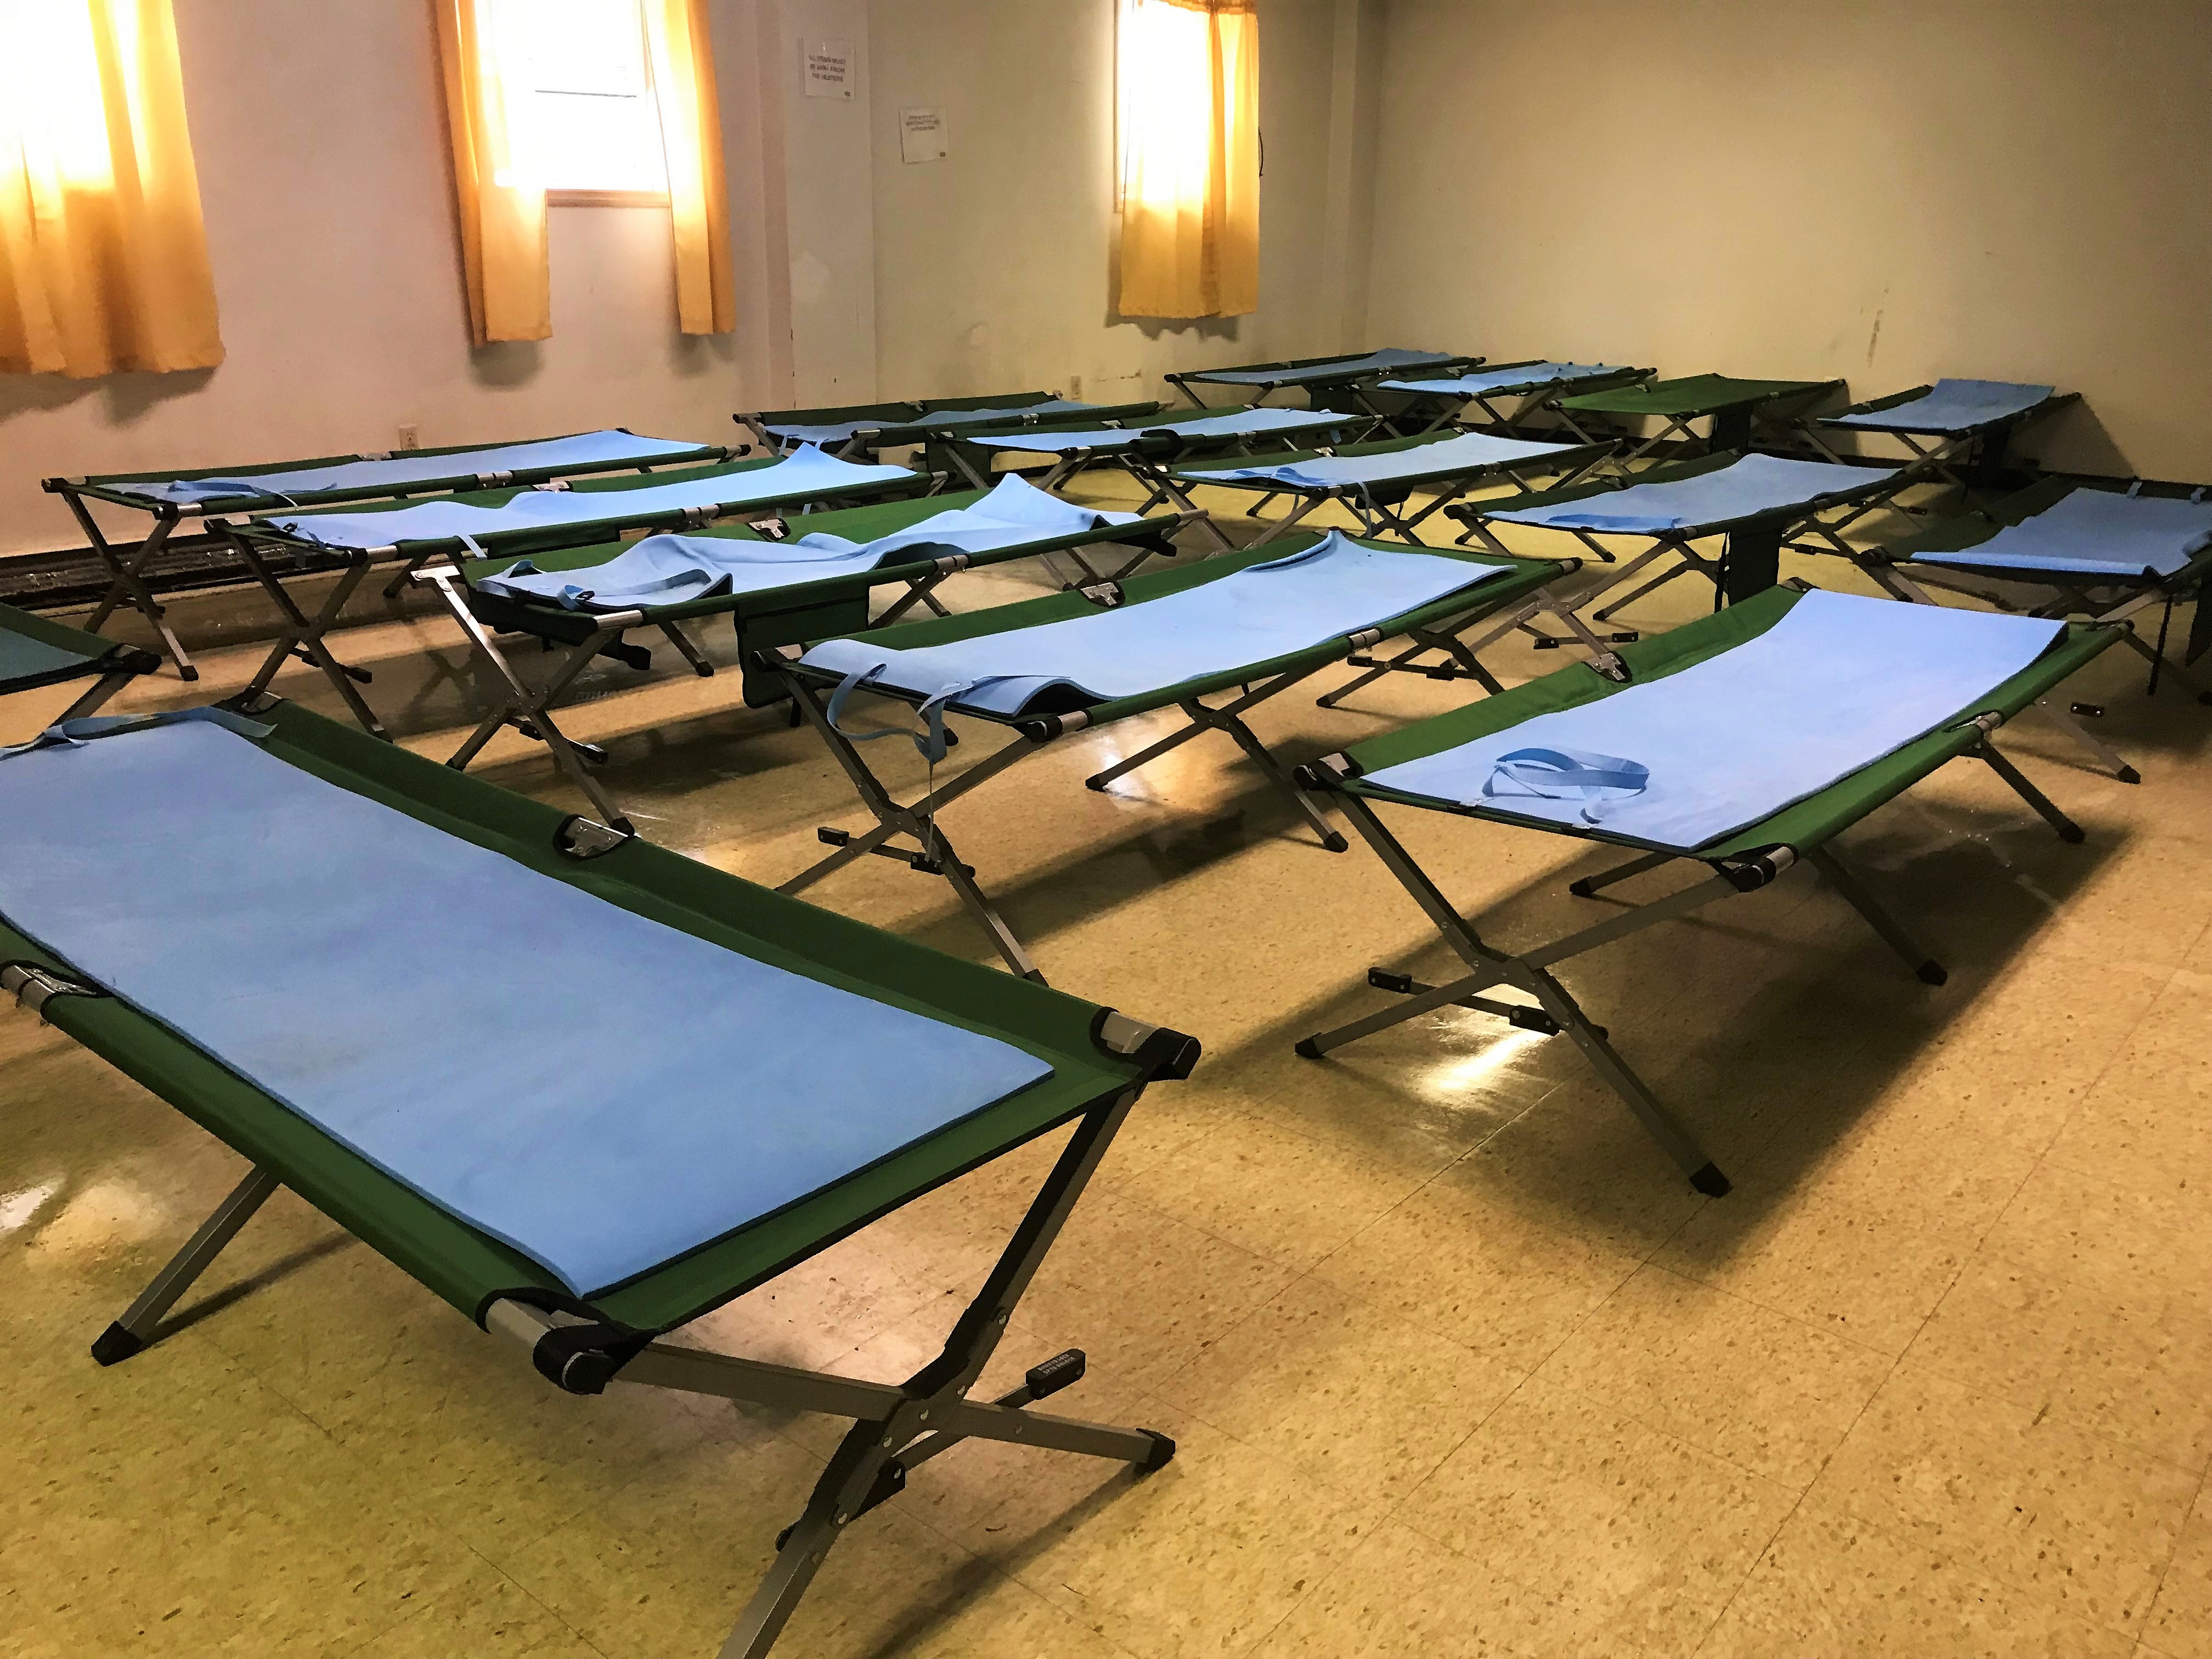 Room filled with clean cots